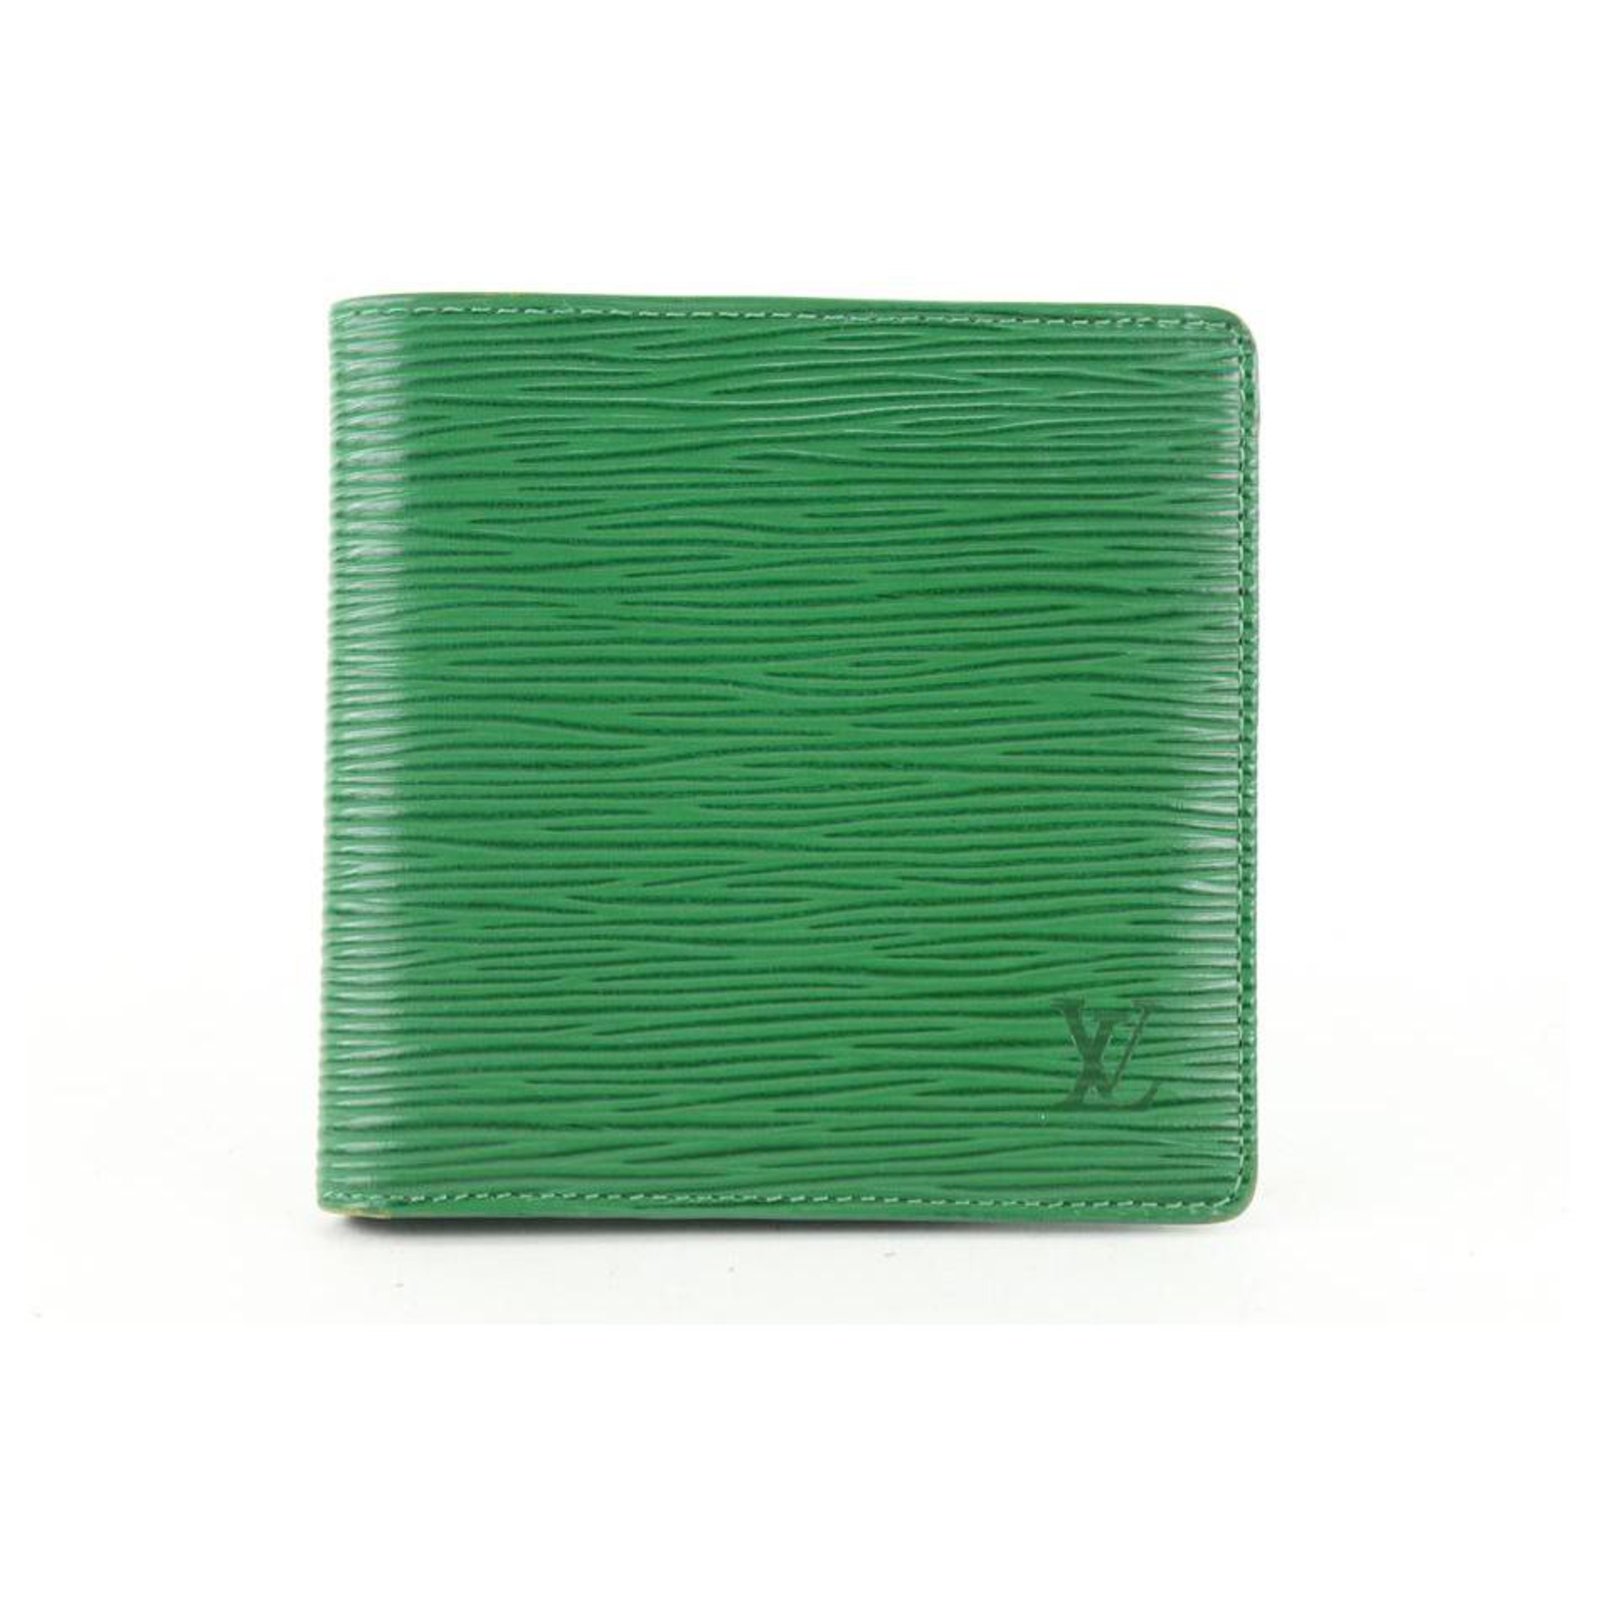 023 Pre-Owned Authentic Louis Vuitton Green Epi Leather Agenda PM Wallet  Datecode: Unreadable